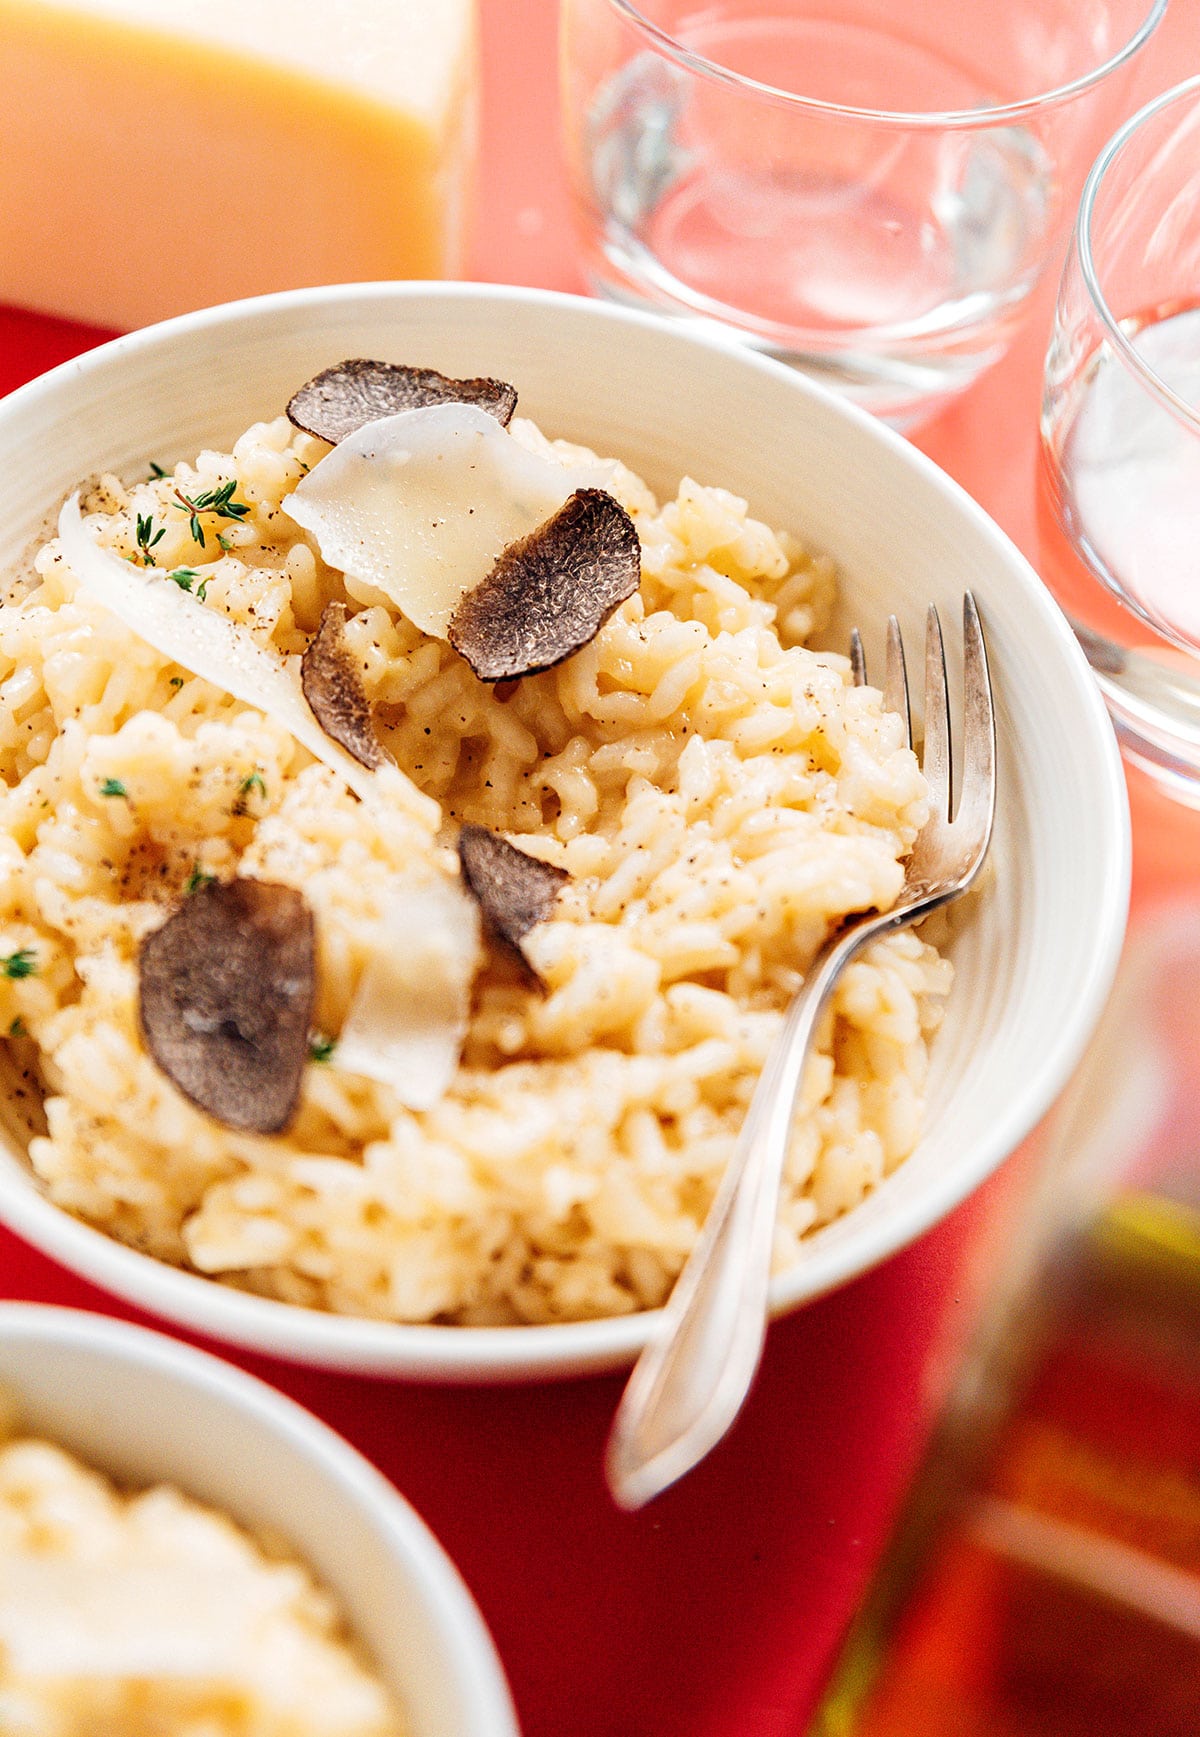 A white ceramic bowl filled with fresh truffle risotto garnished with parmesan cheese, truffles, and herbs